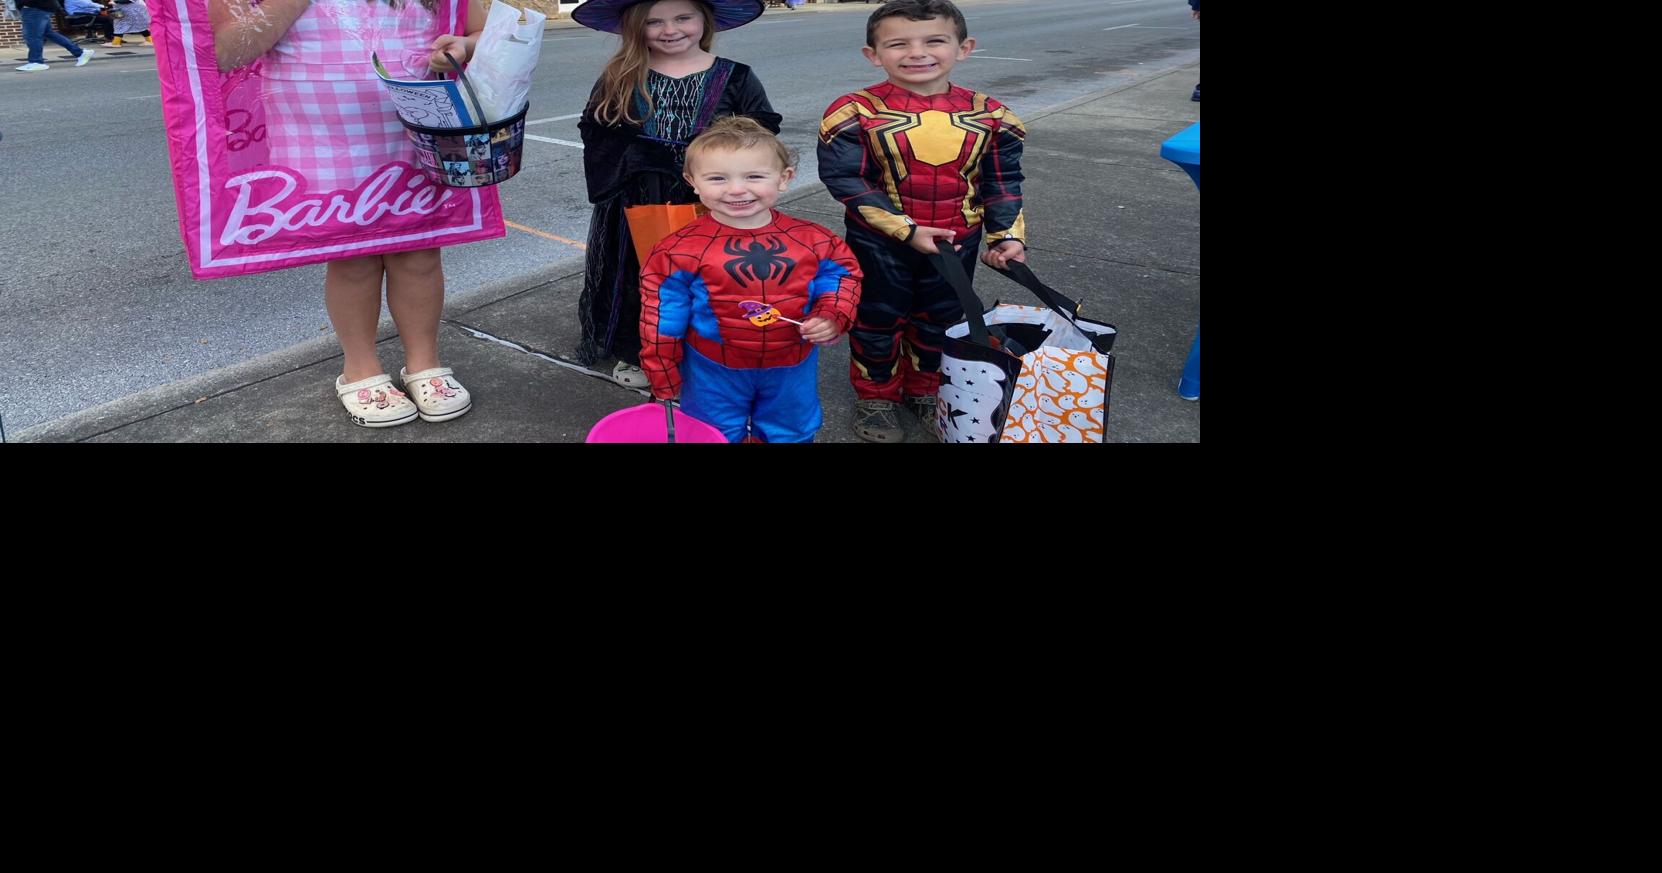 Corbin's TrickorTreat on Main a Scary Good Time News